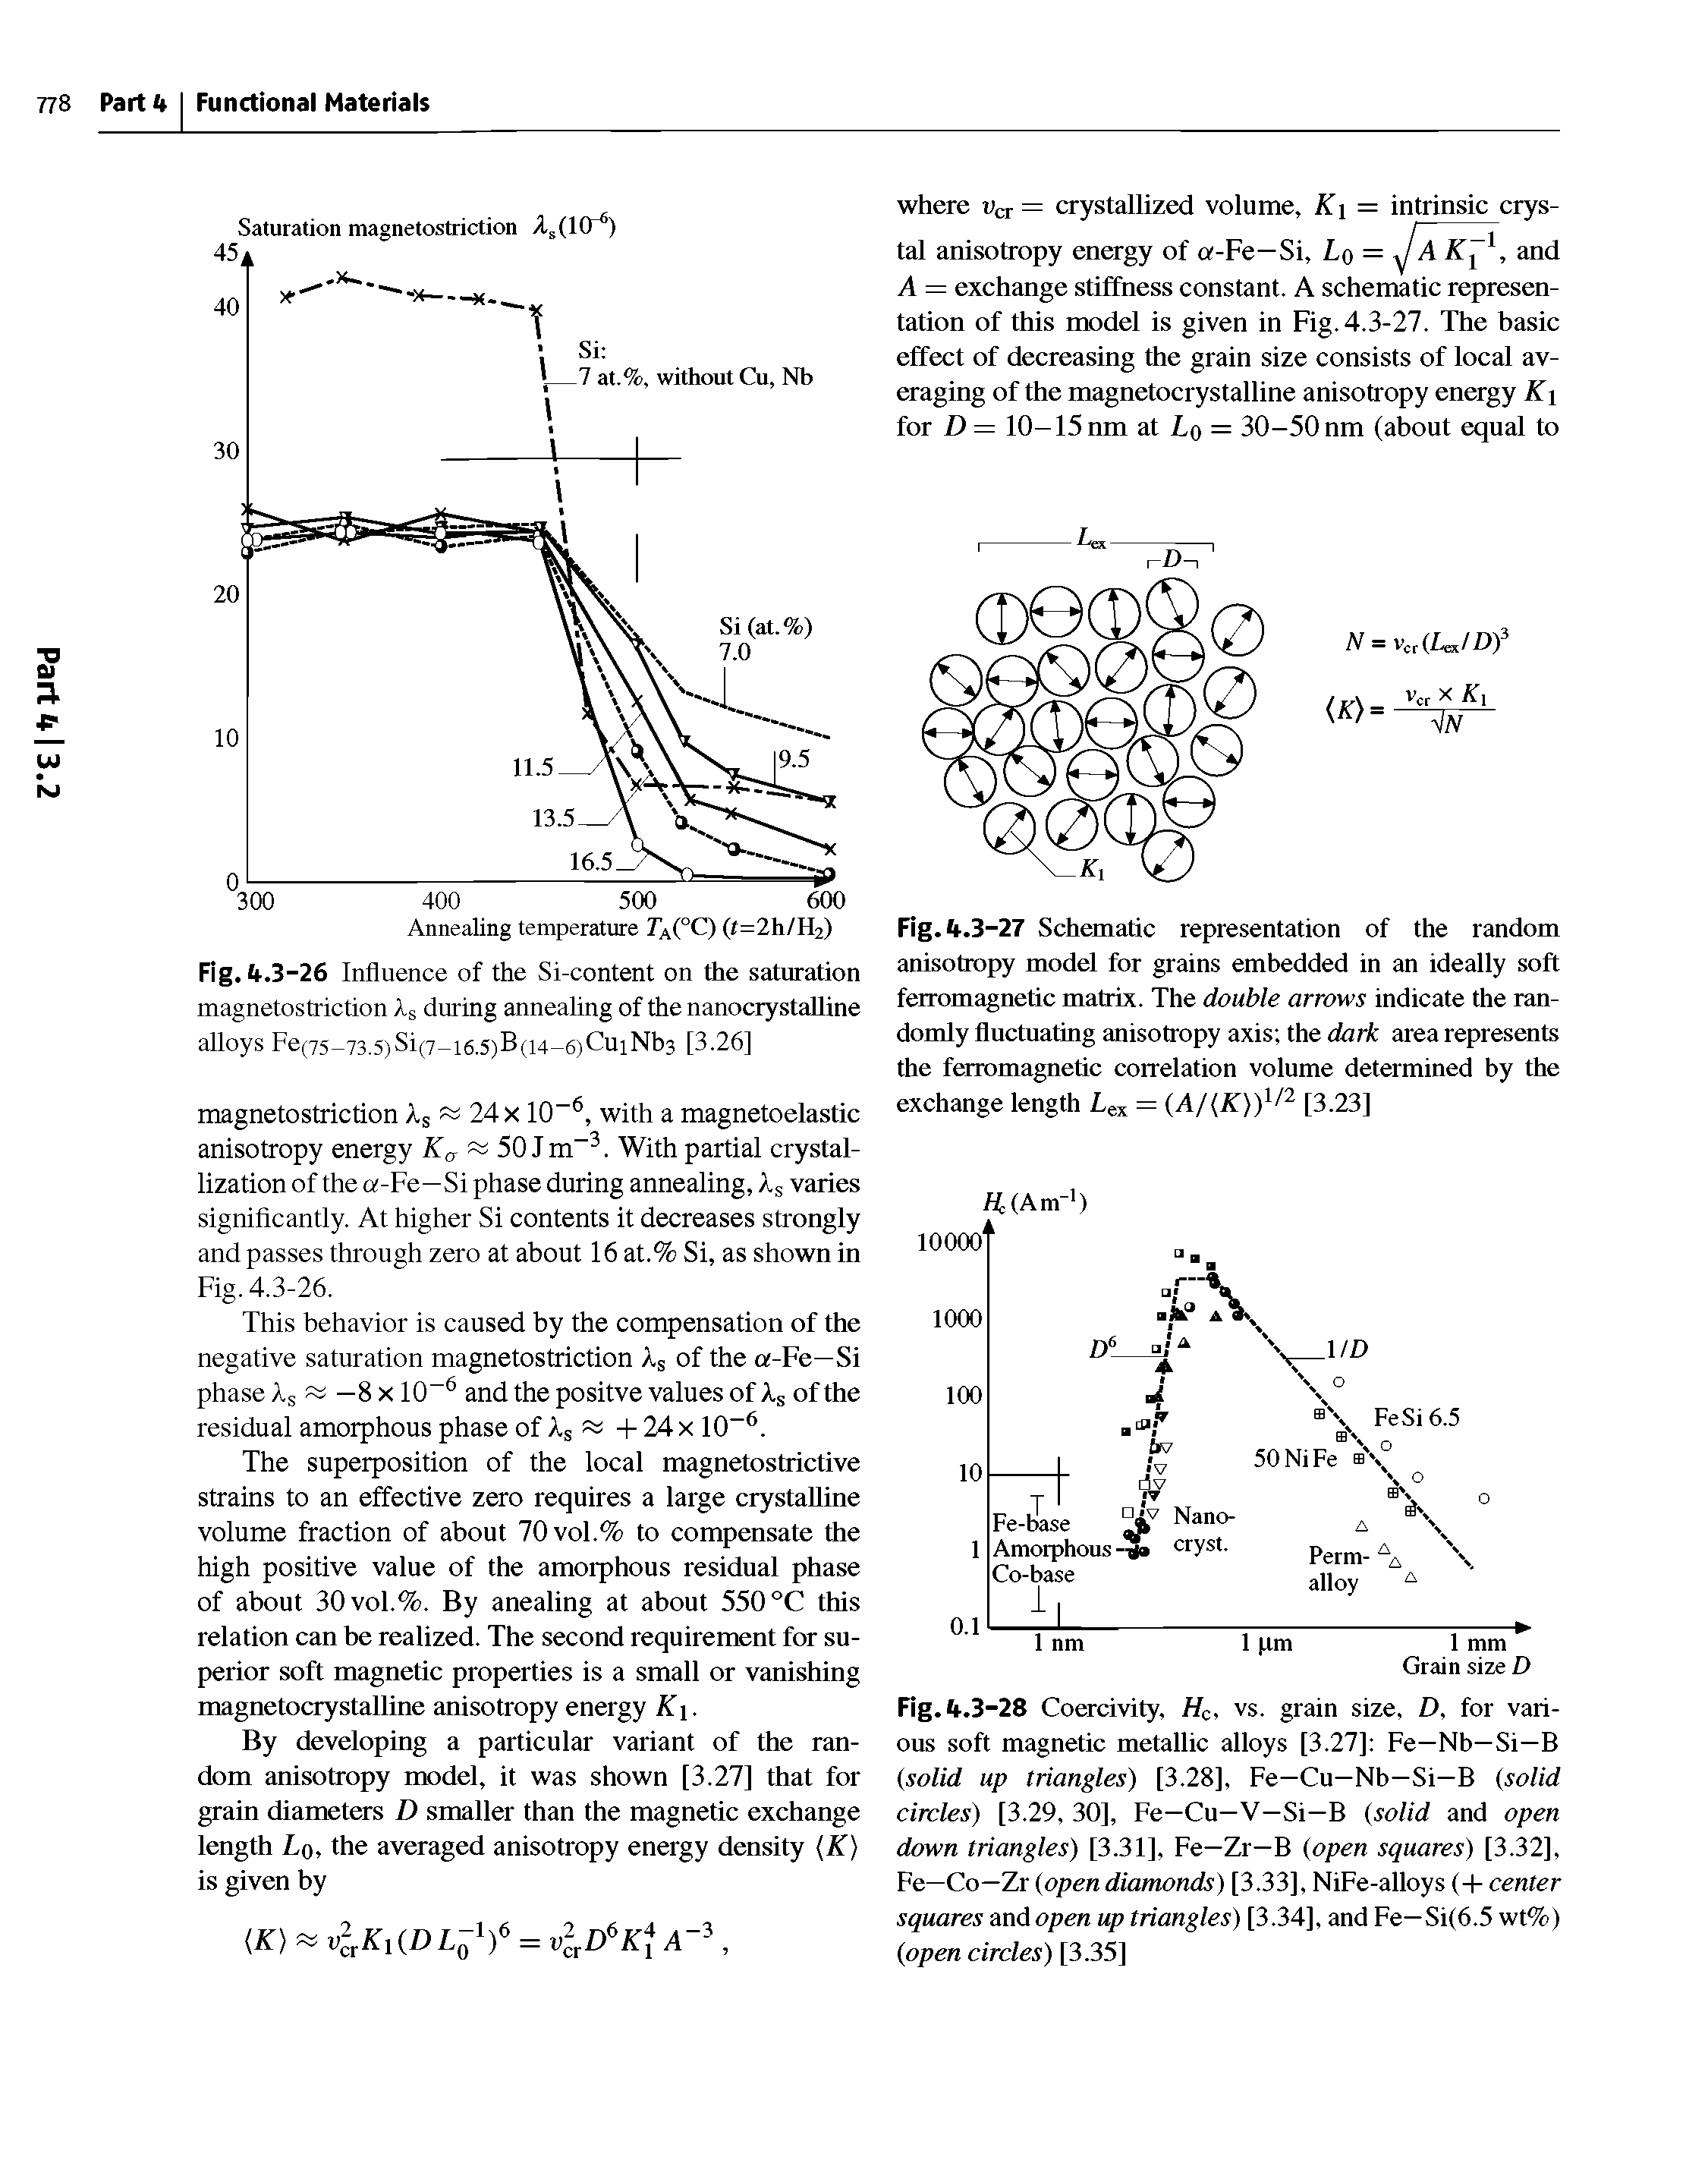 Fig. 4.3-27 Schematic representation of the random anisotropy model for grains embedded in an ideally soft ferromagnetic matrix. The double arrows indicate the randomly fluctuating anisotropy axis the dark area represents the ferromagnetic correlation volume determined by the exchange length Lex = A/(K)) I [3.23]...